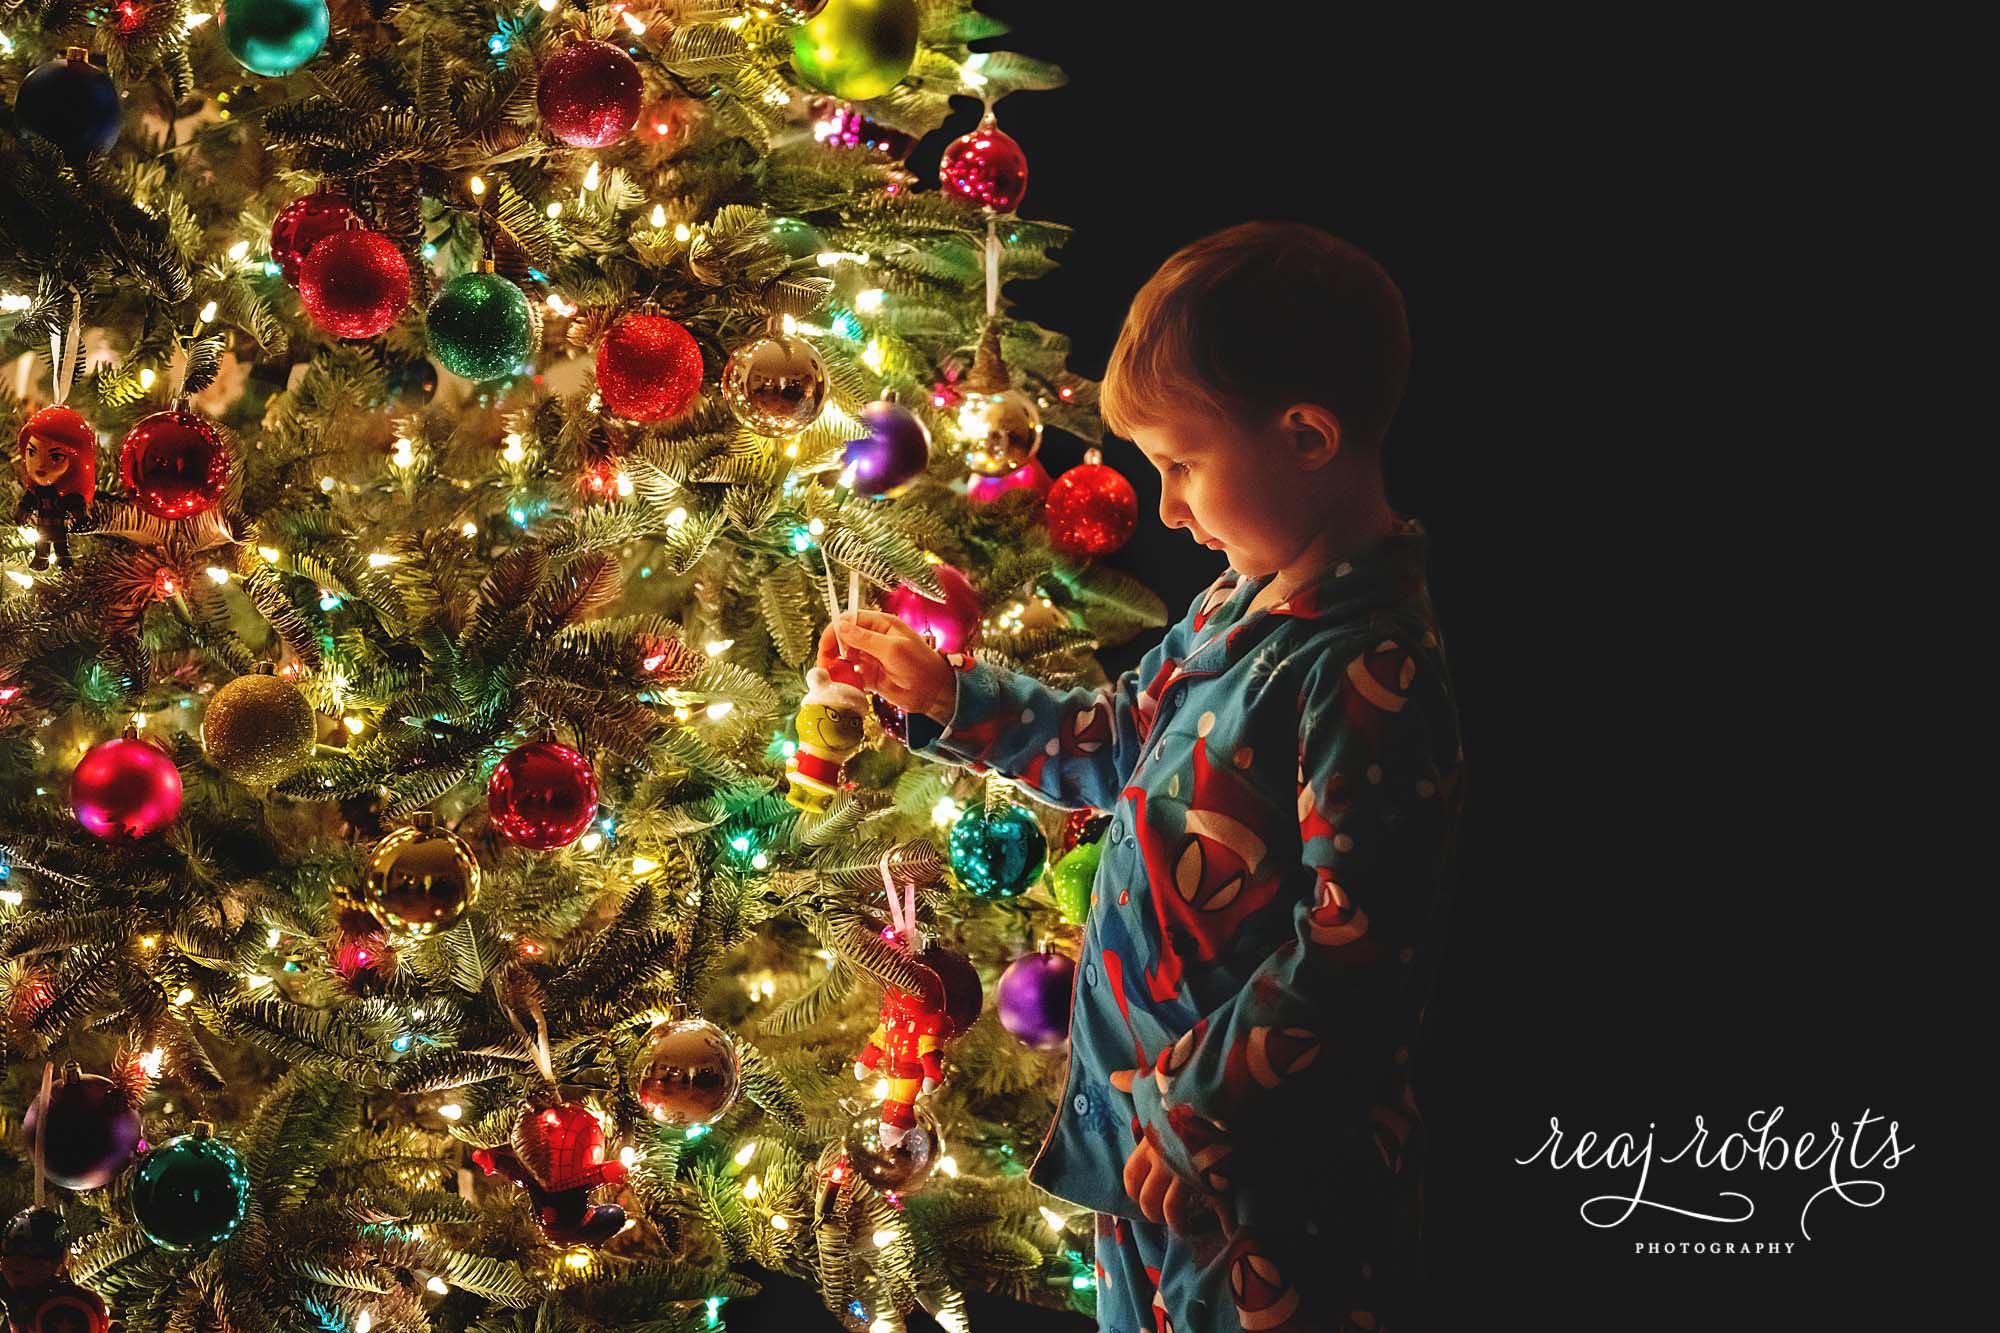 The magic of Christmas Christmas tree photos | Simply Sparkle Sessions by Reaj Roberts Photography